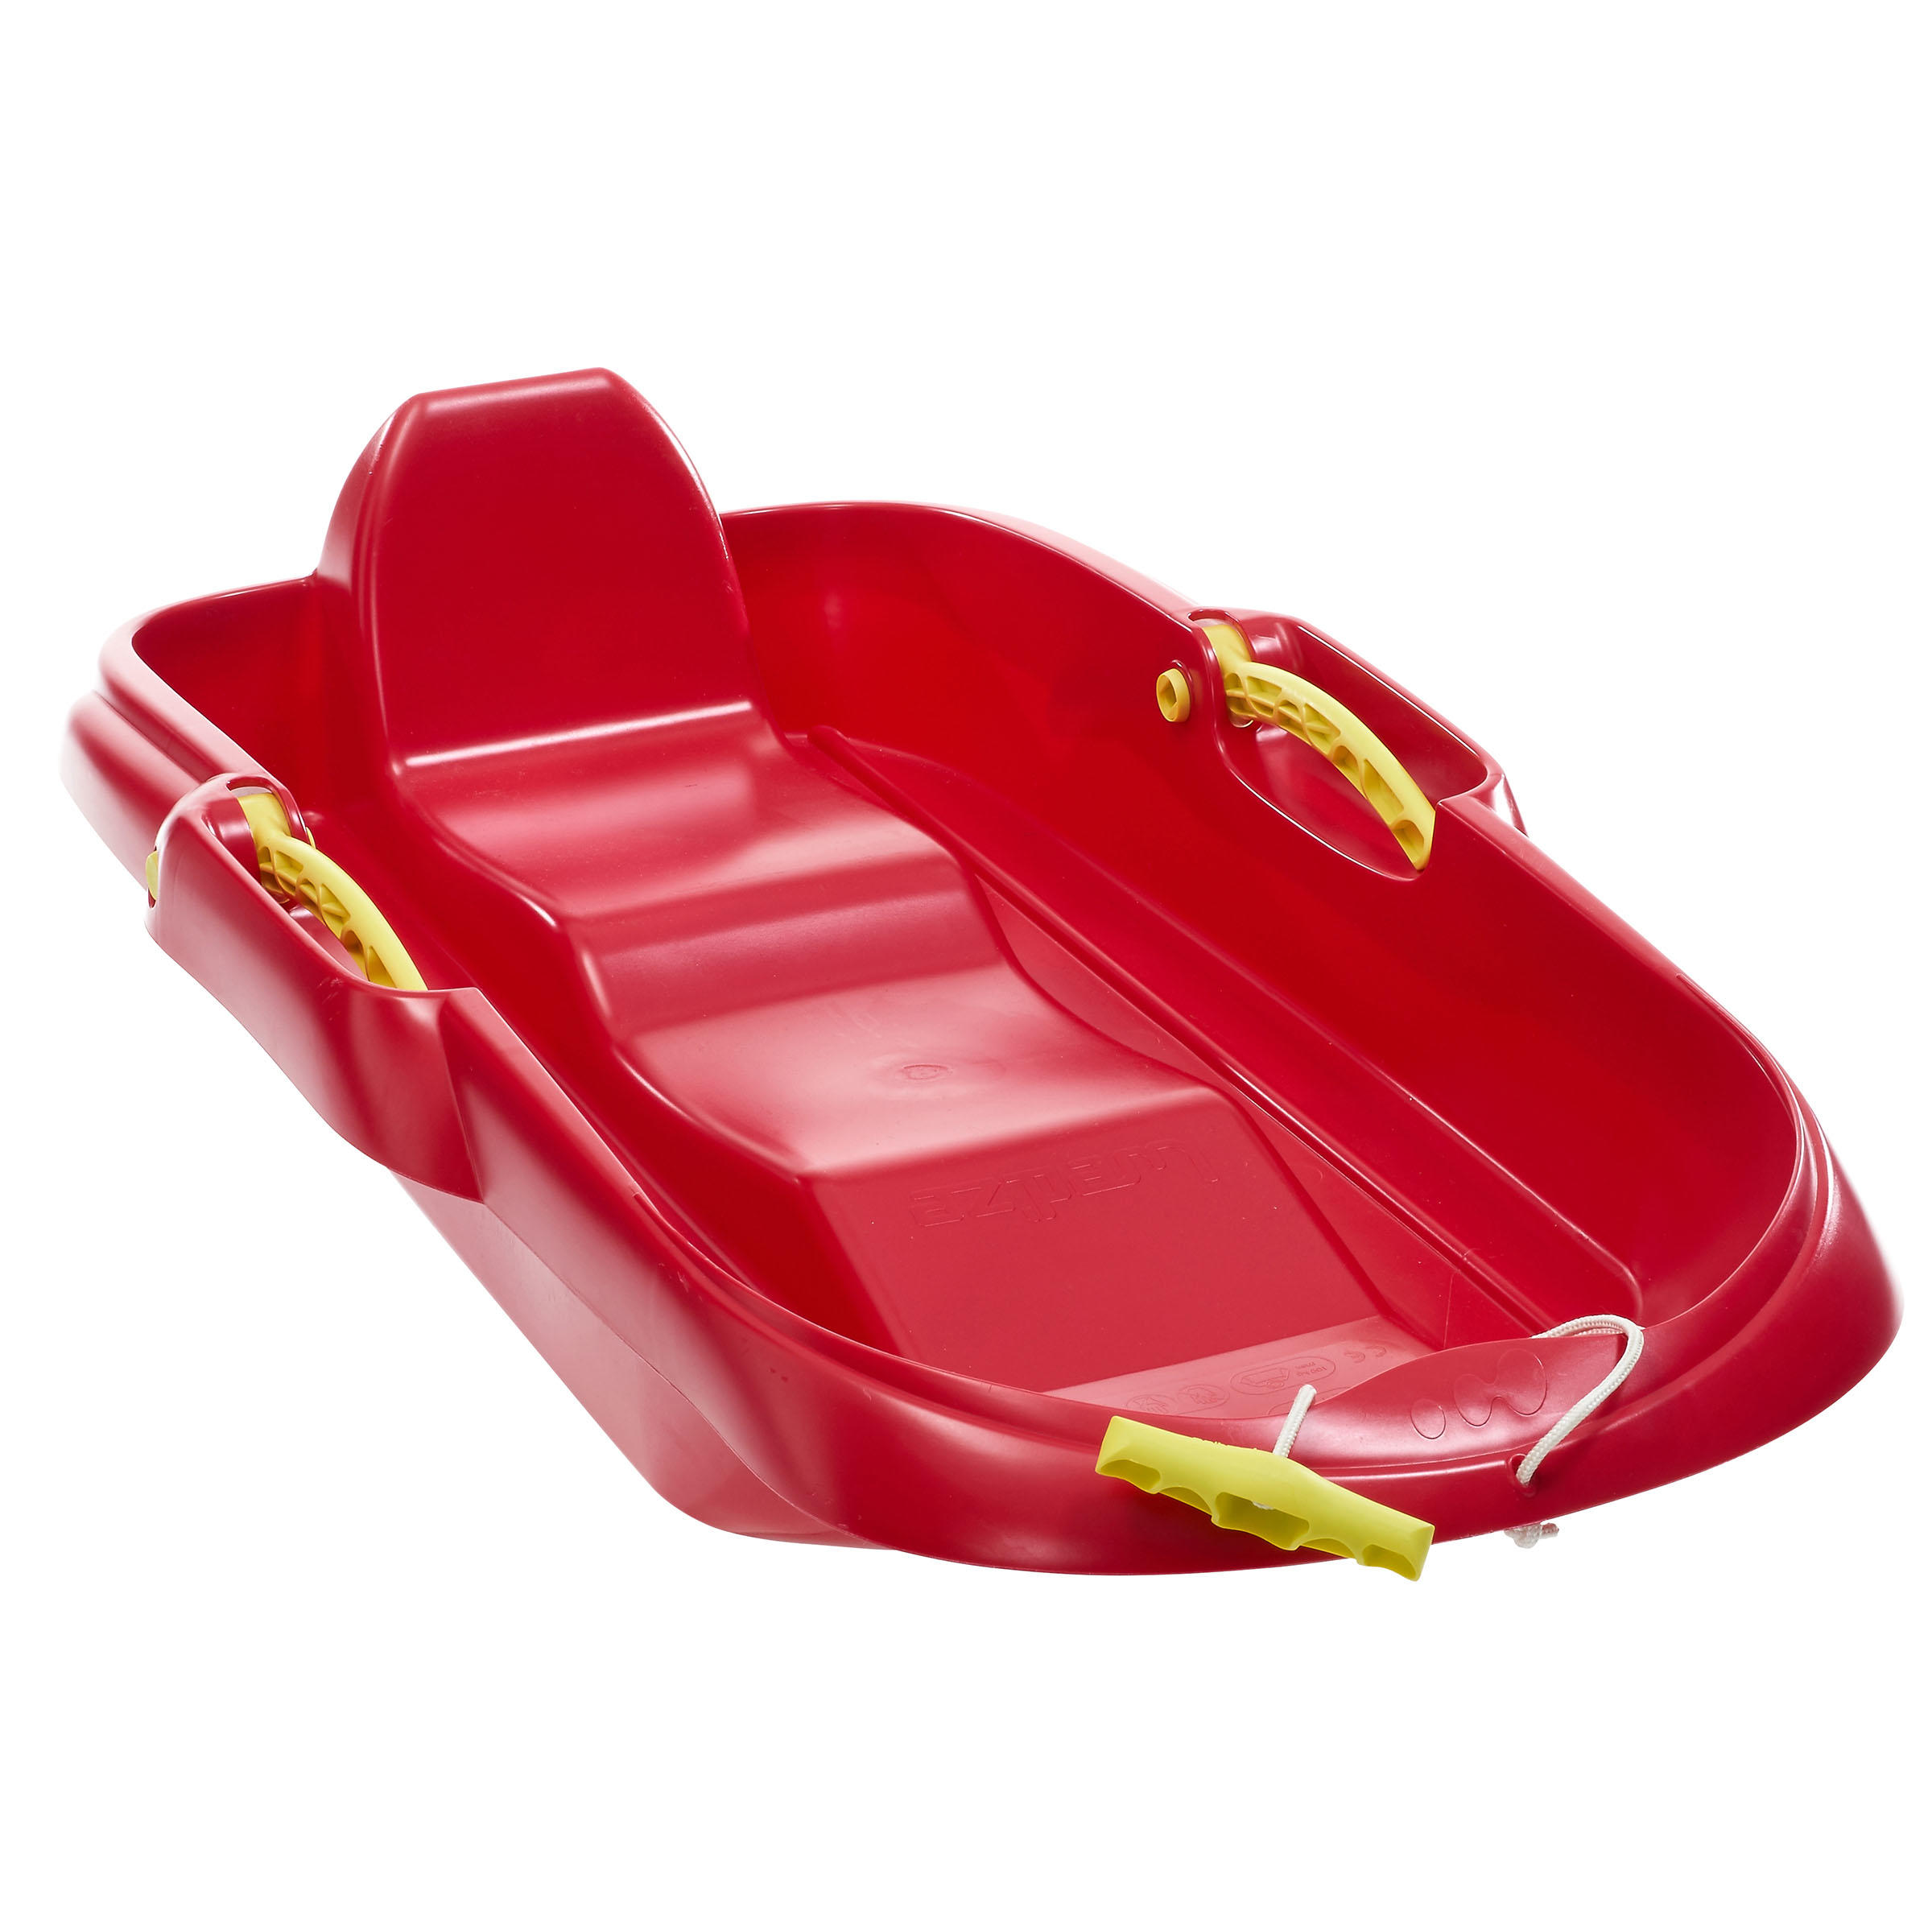 MRZ 100 2-Person Sledge With Brake - Red 4/8